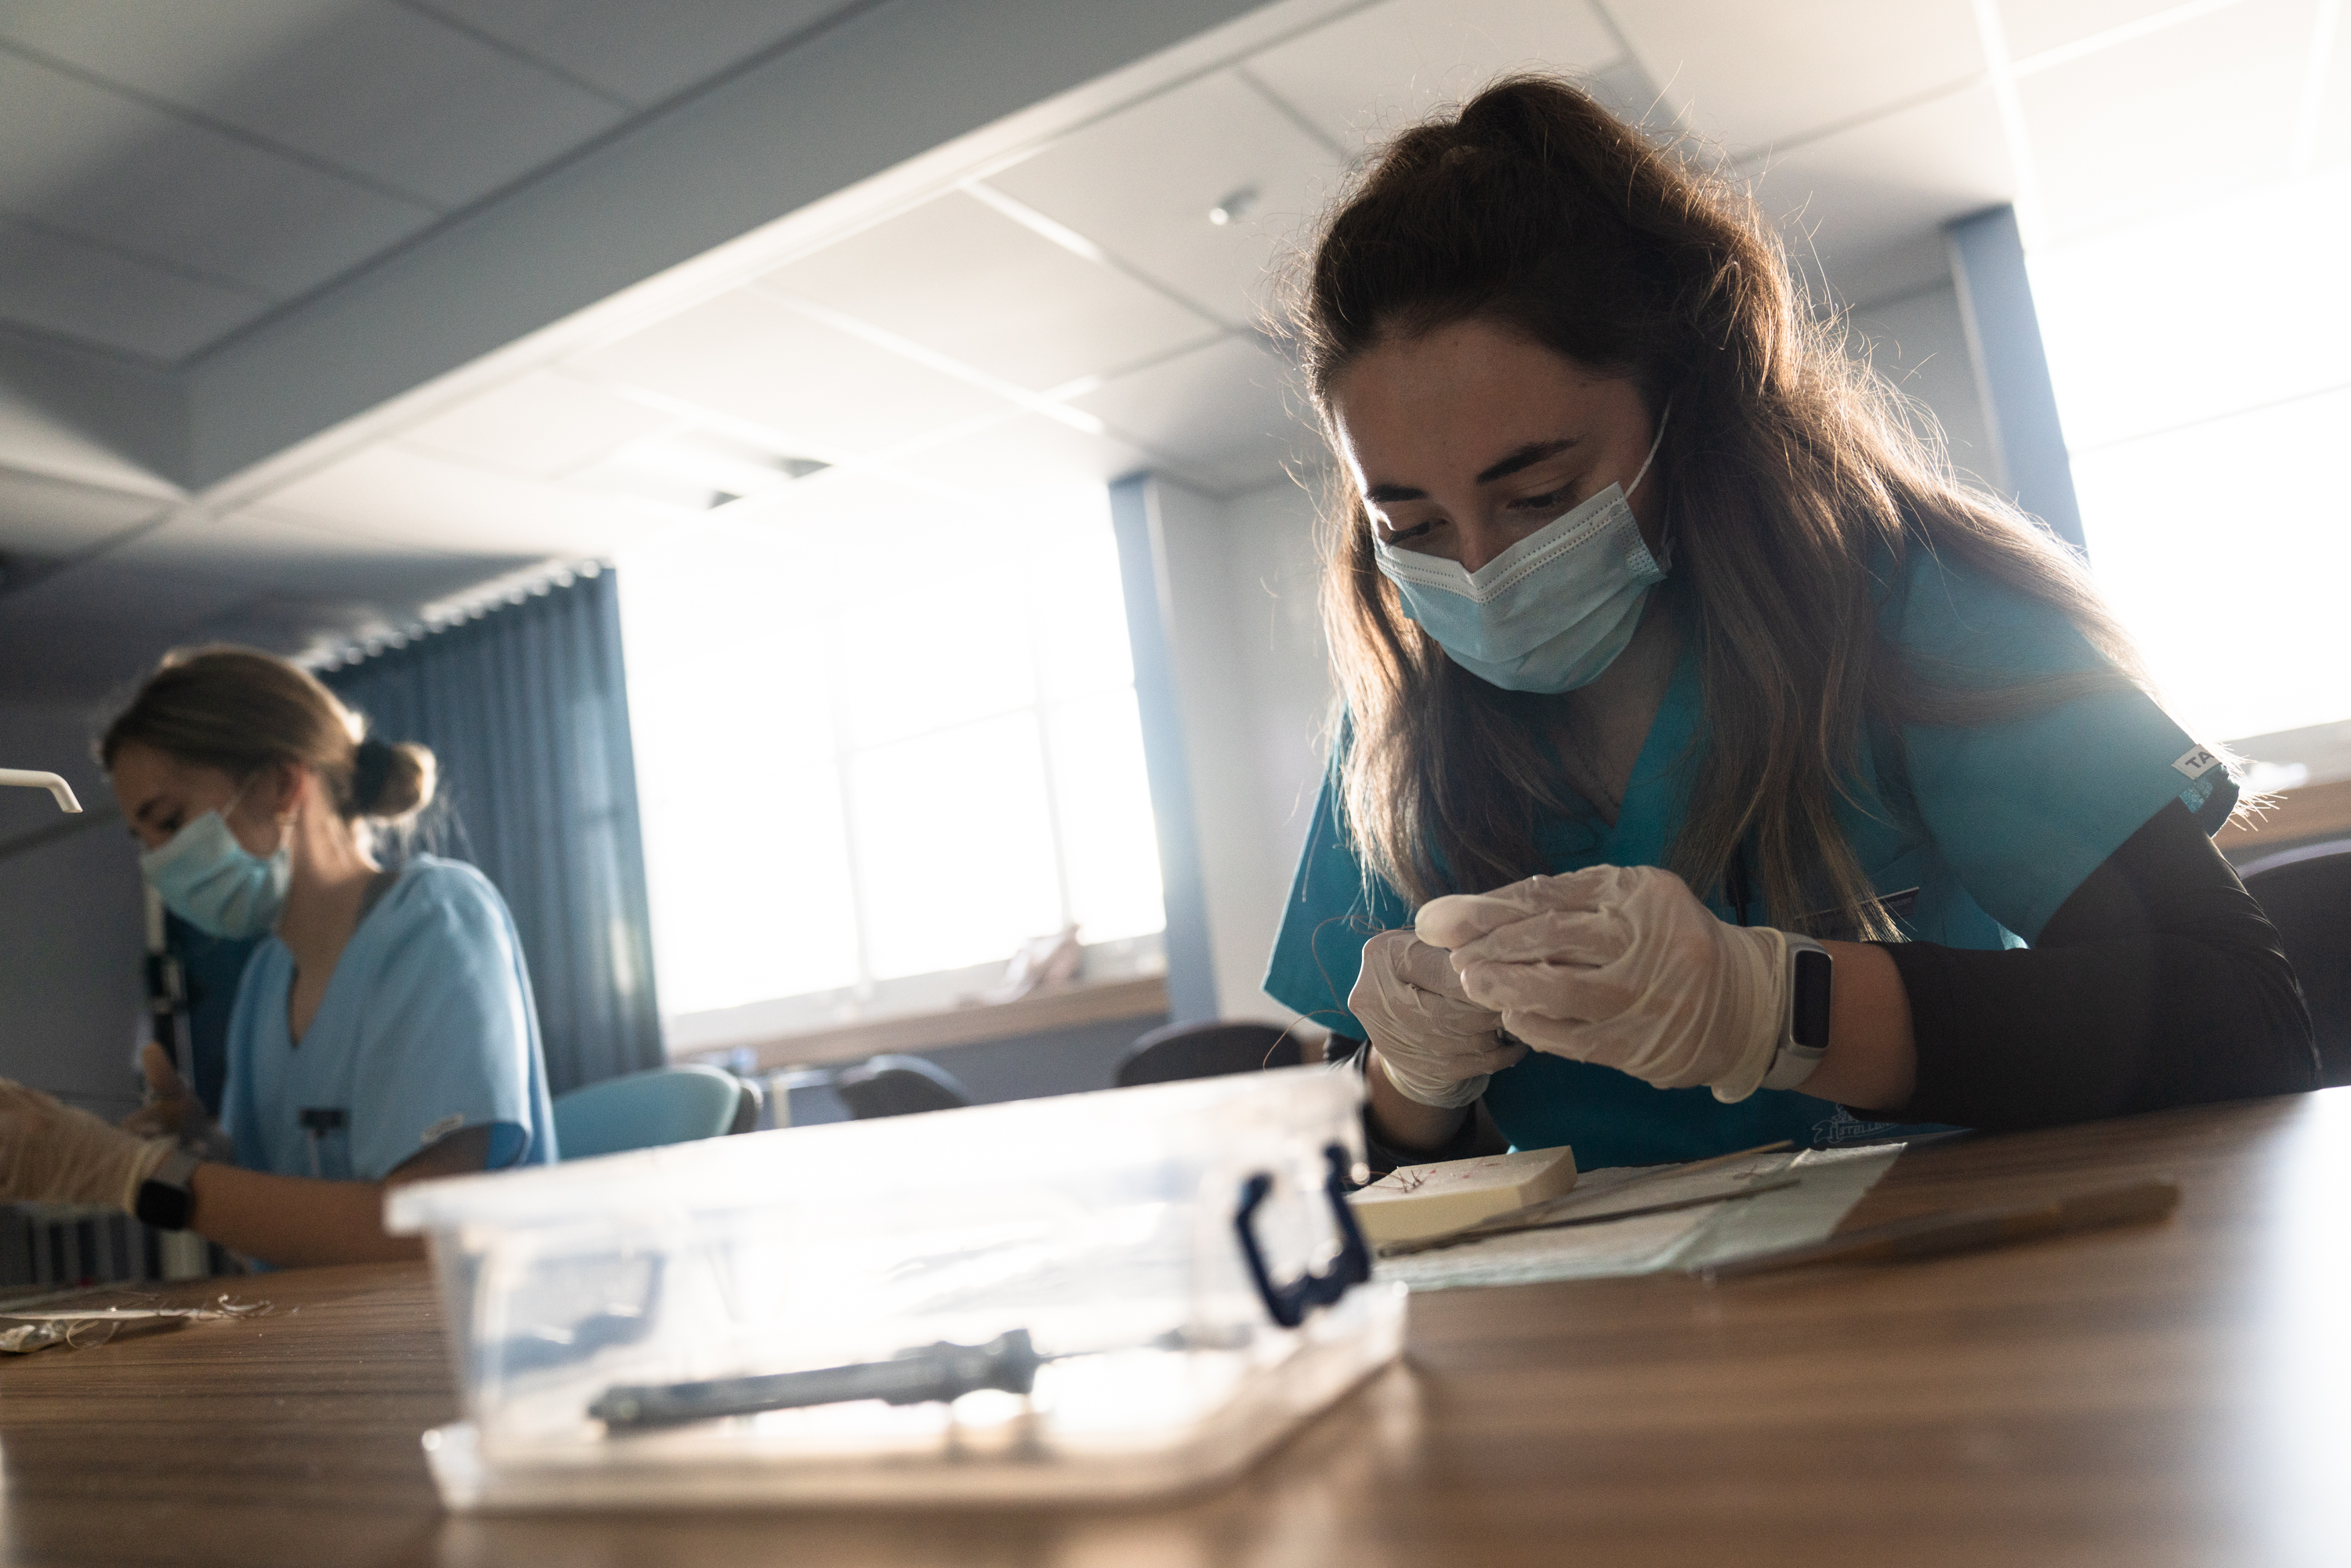 Third-year medical students practice suturing